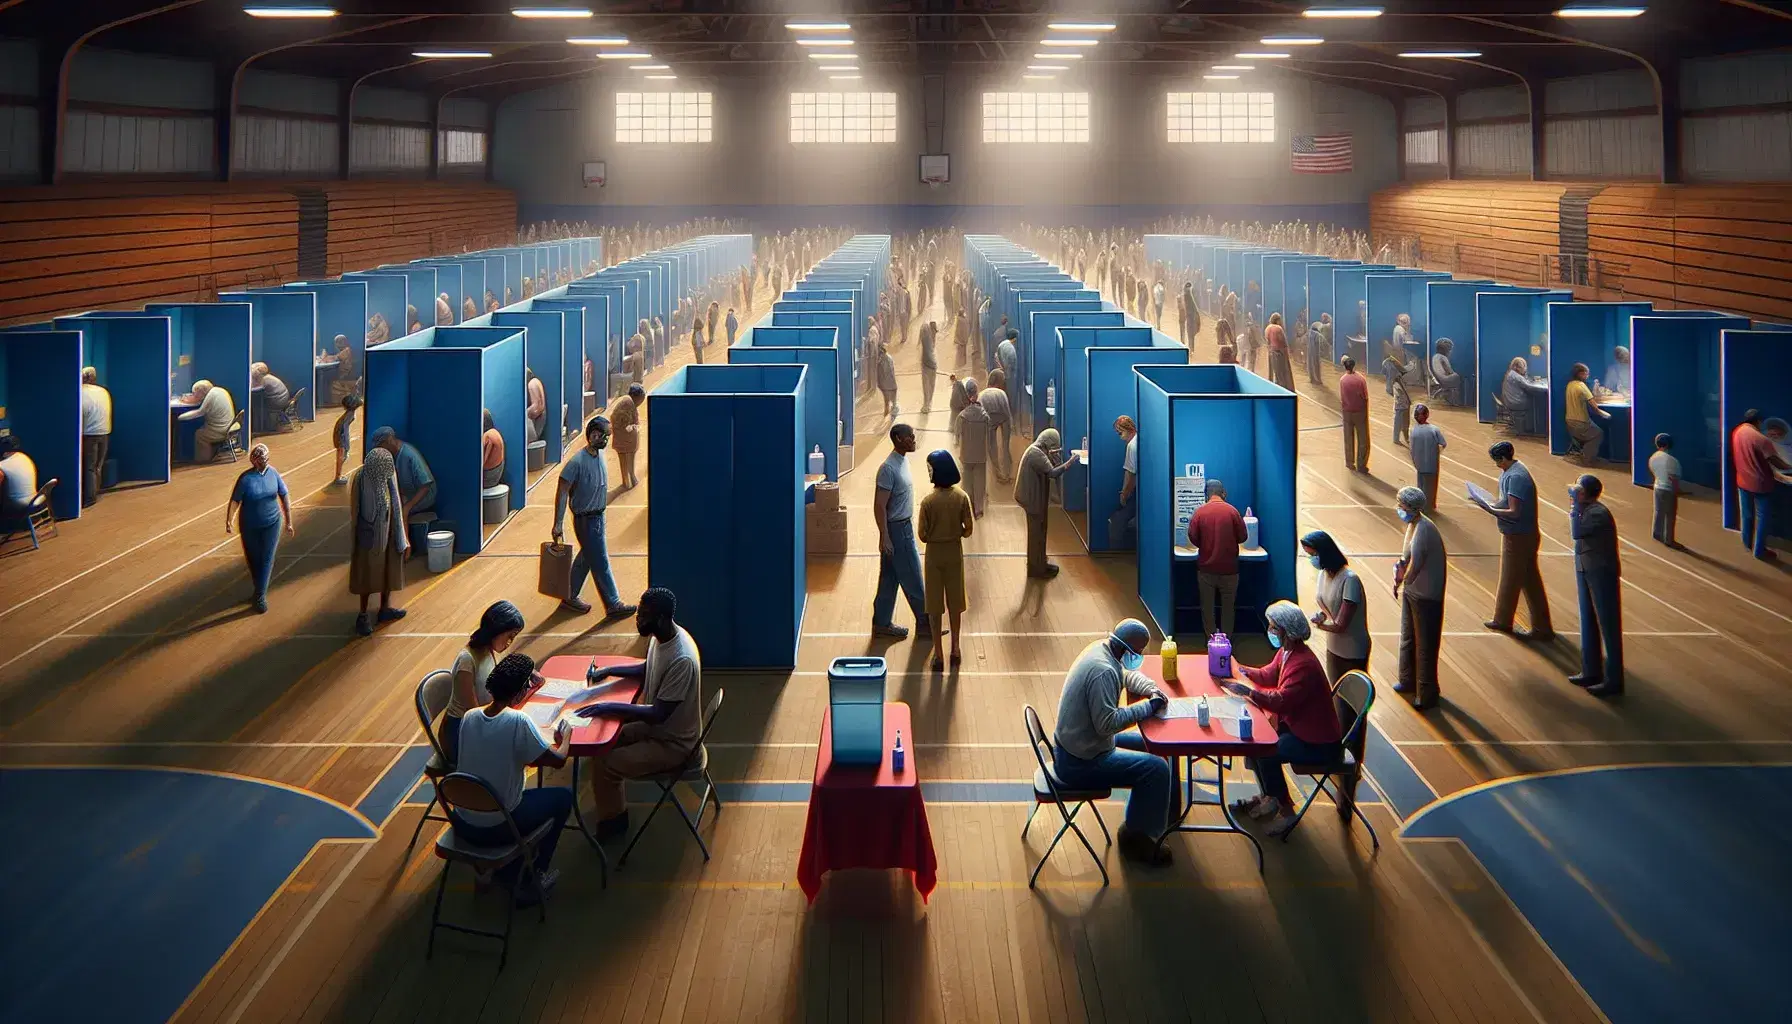 Busy voting scene in a converted gym with people of diverse ethnicities filling out ballots in blue privacy booths, guided by volunteers at a red-draped table.